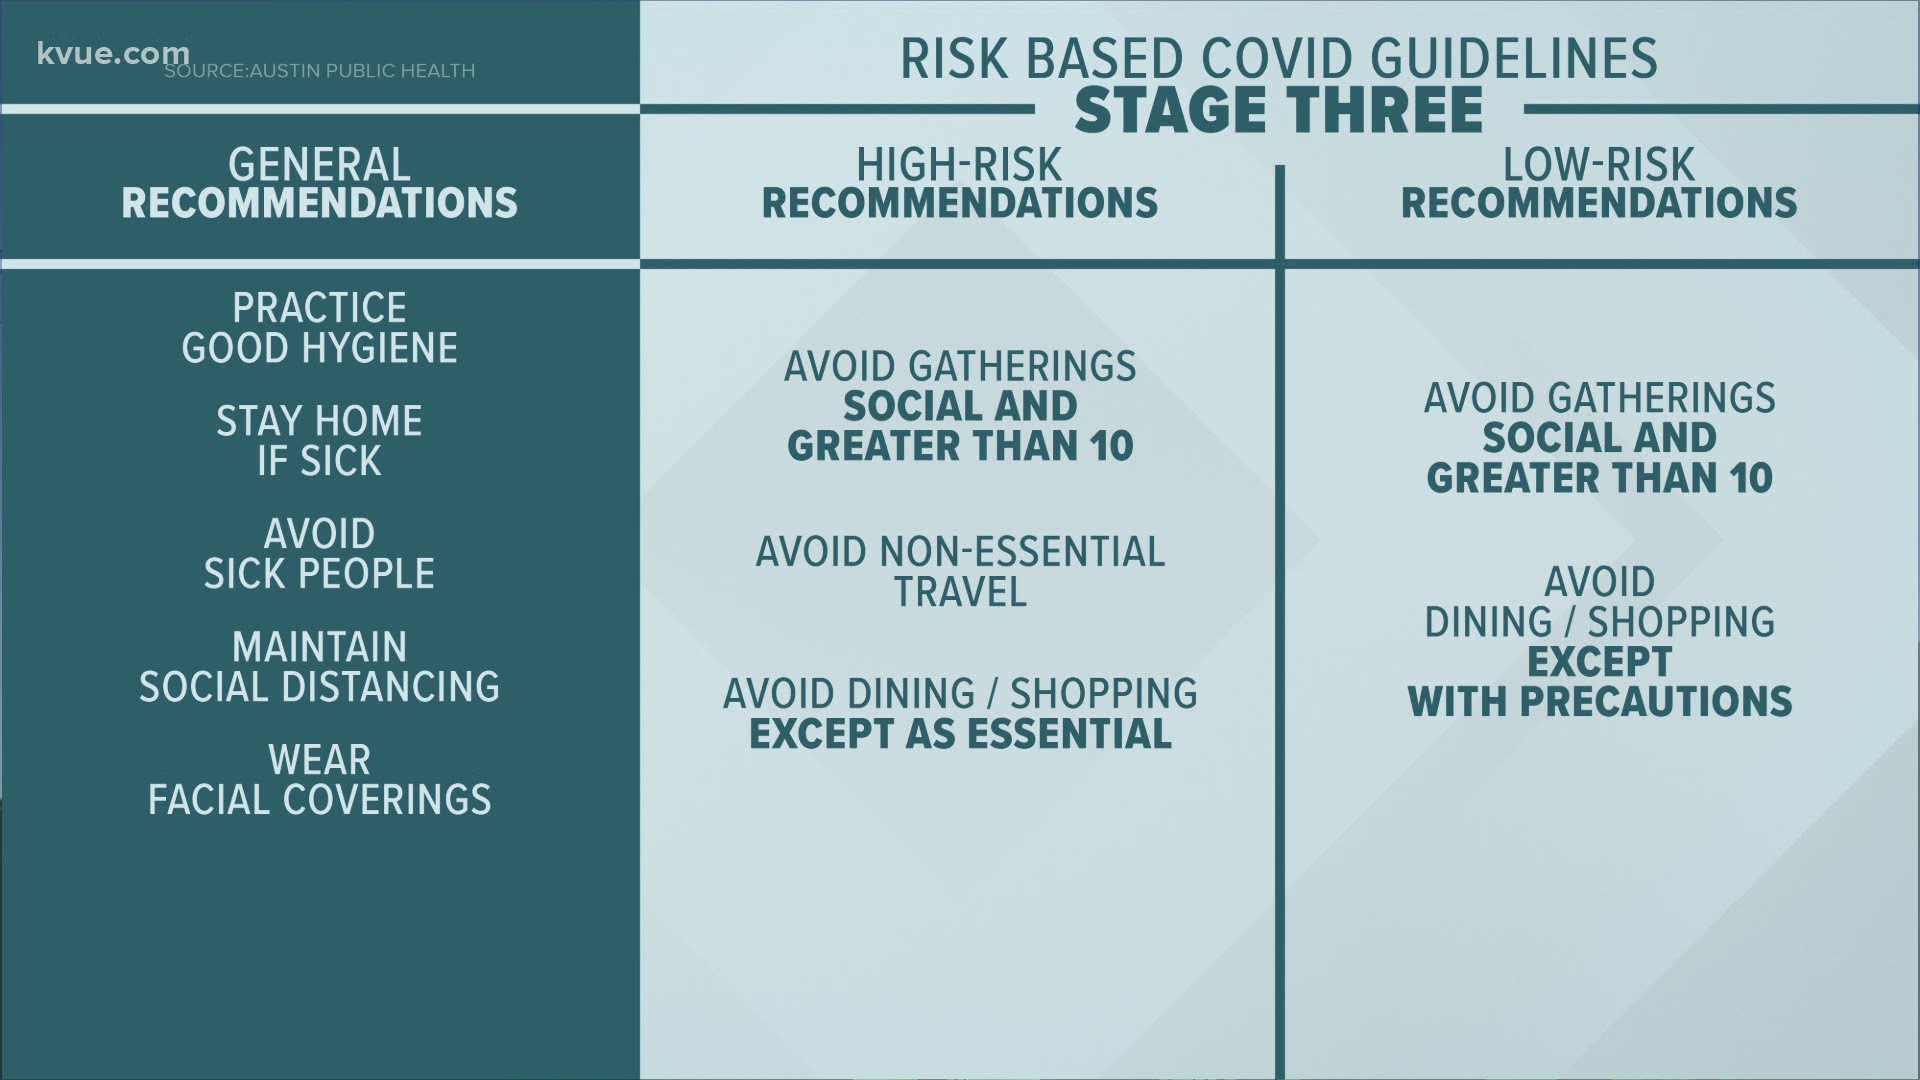 Austin and Travis County are moving back down on the risk-based COVID-19 guidelines chart from Stage 4 to Stage 3.